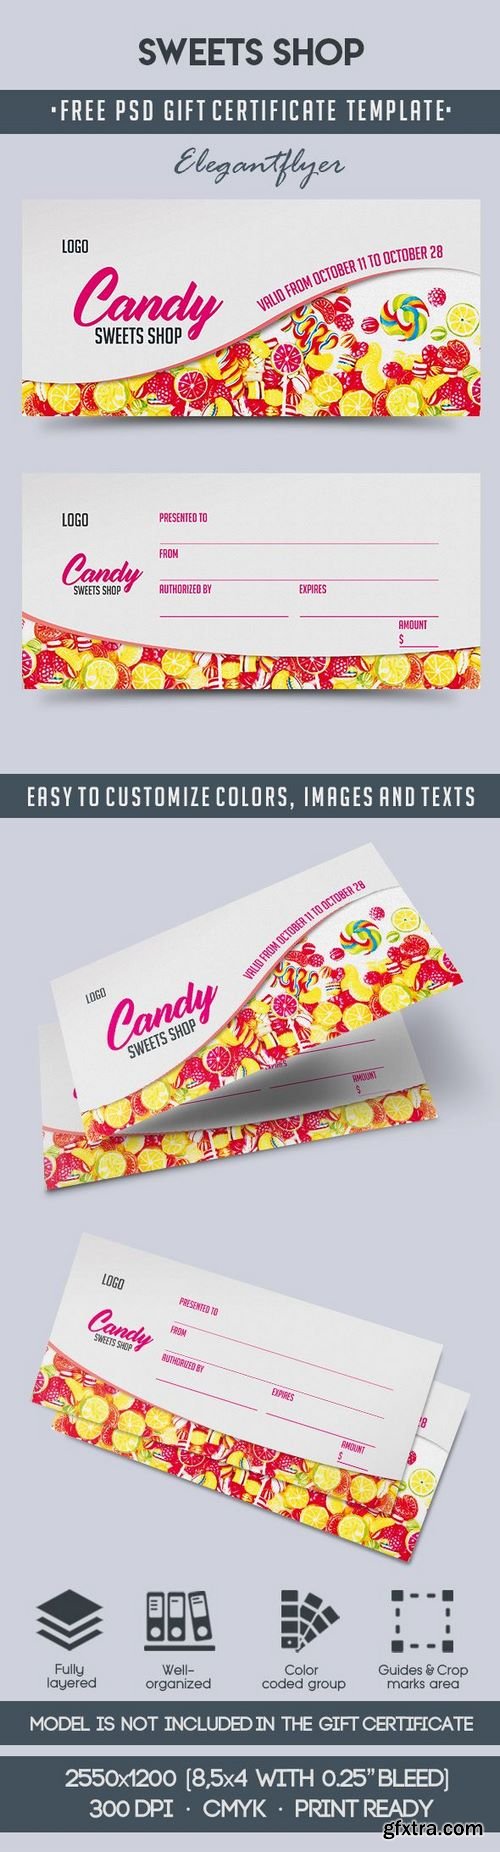 Sweets Shop – Gift Certificate PSD Template